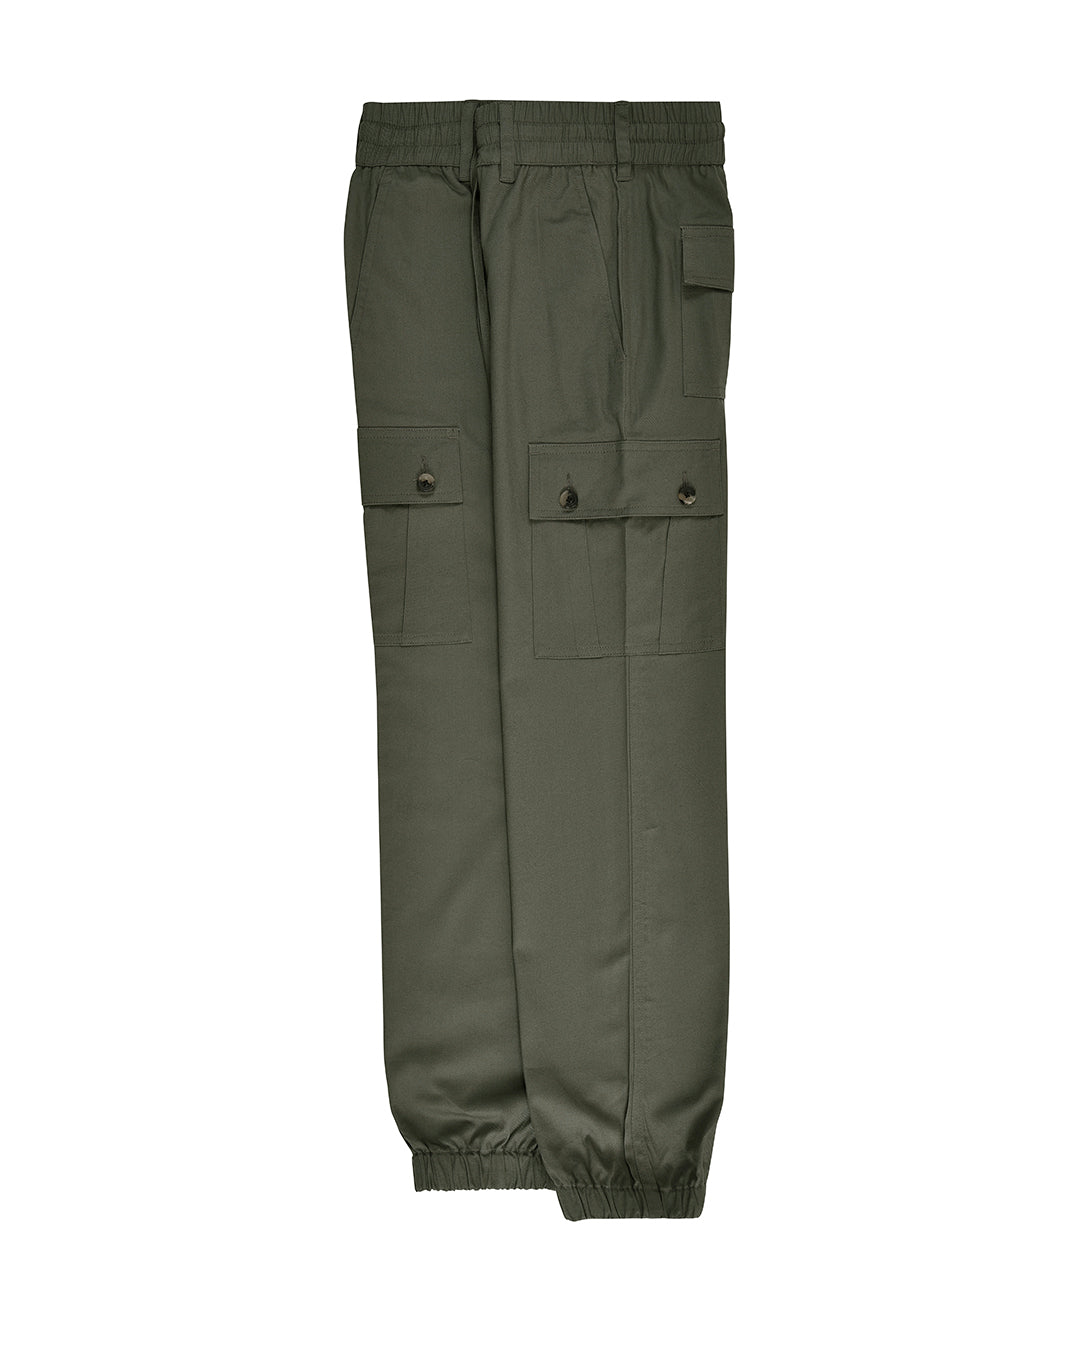 Side view of custom cargo pants for men by Luxire in olive green